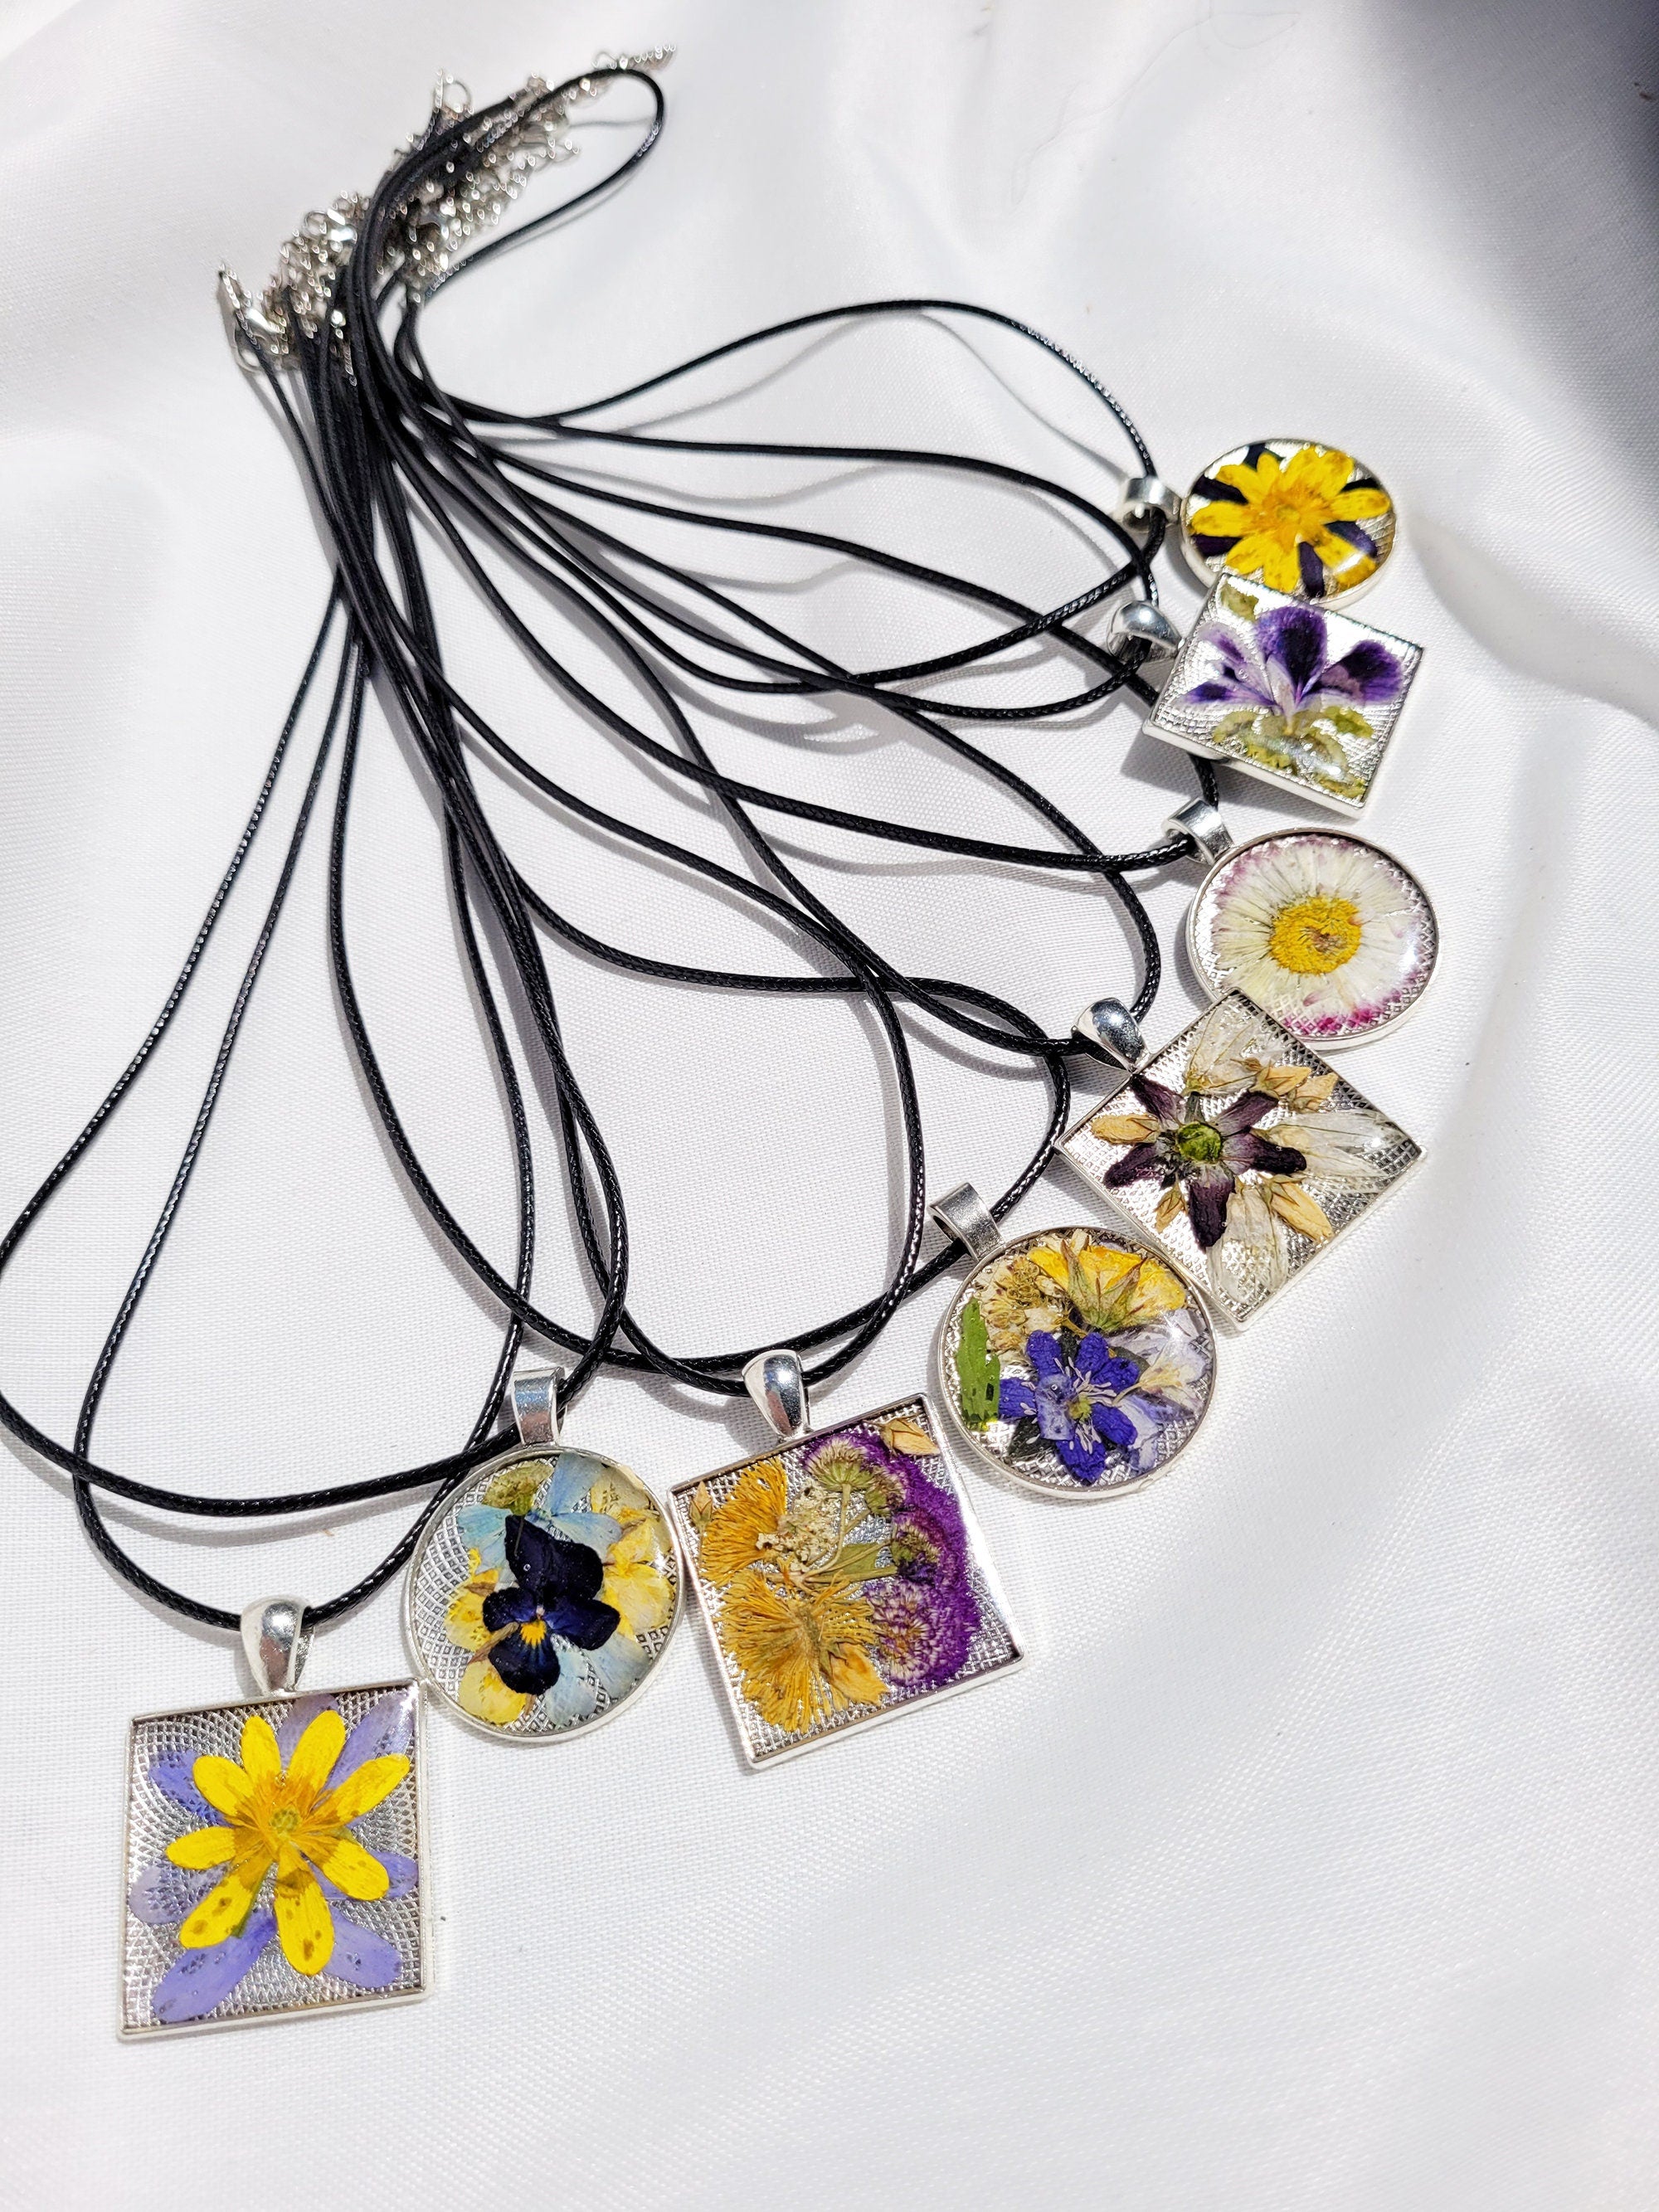 Handmade pendant, Dried flower resin square pendant necklace, pressed flower jewelry, floral herbarium collar,  S2